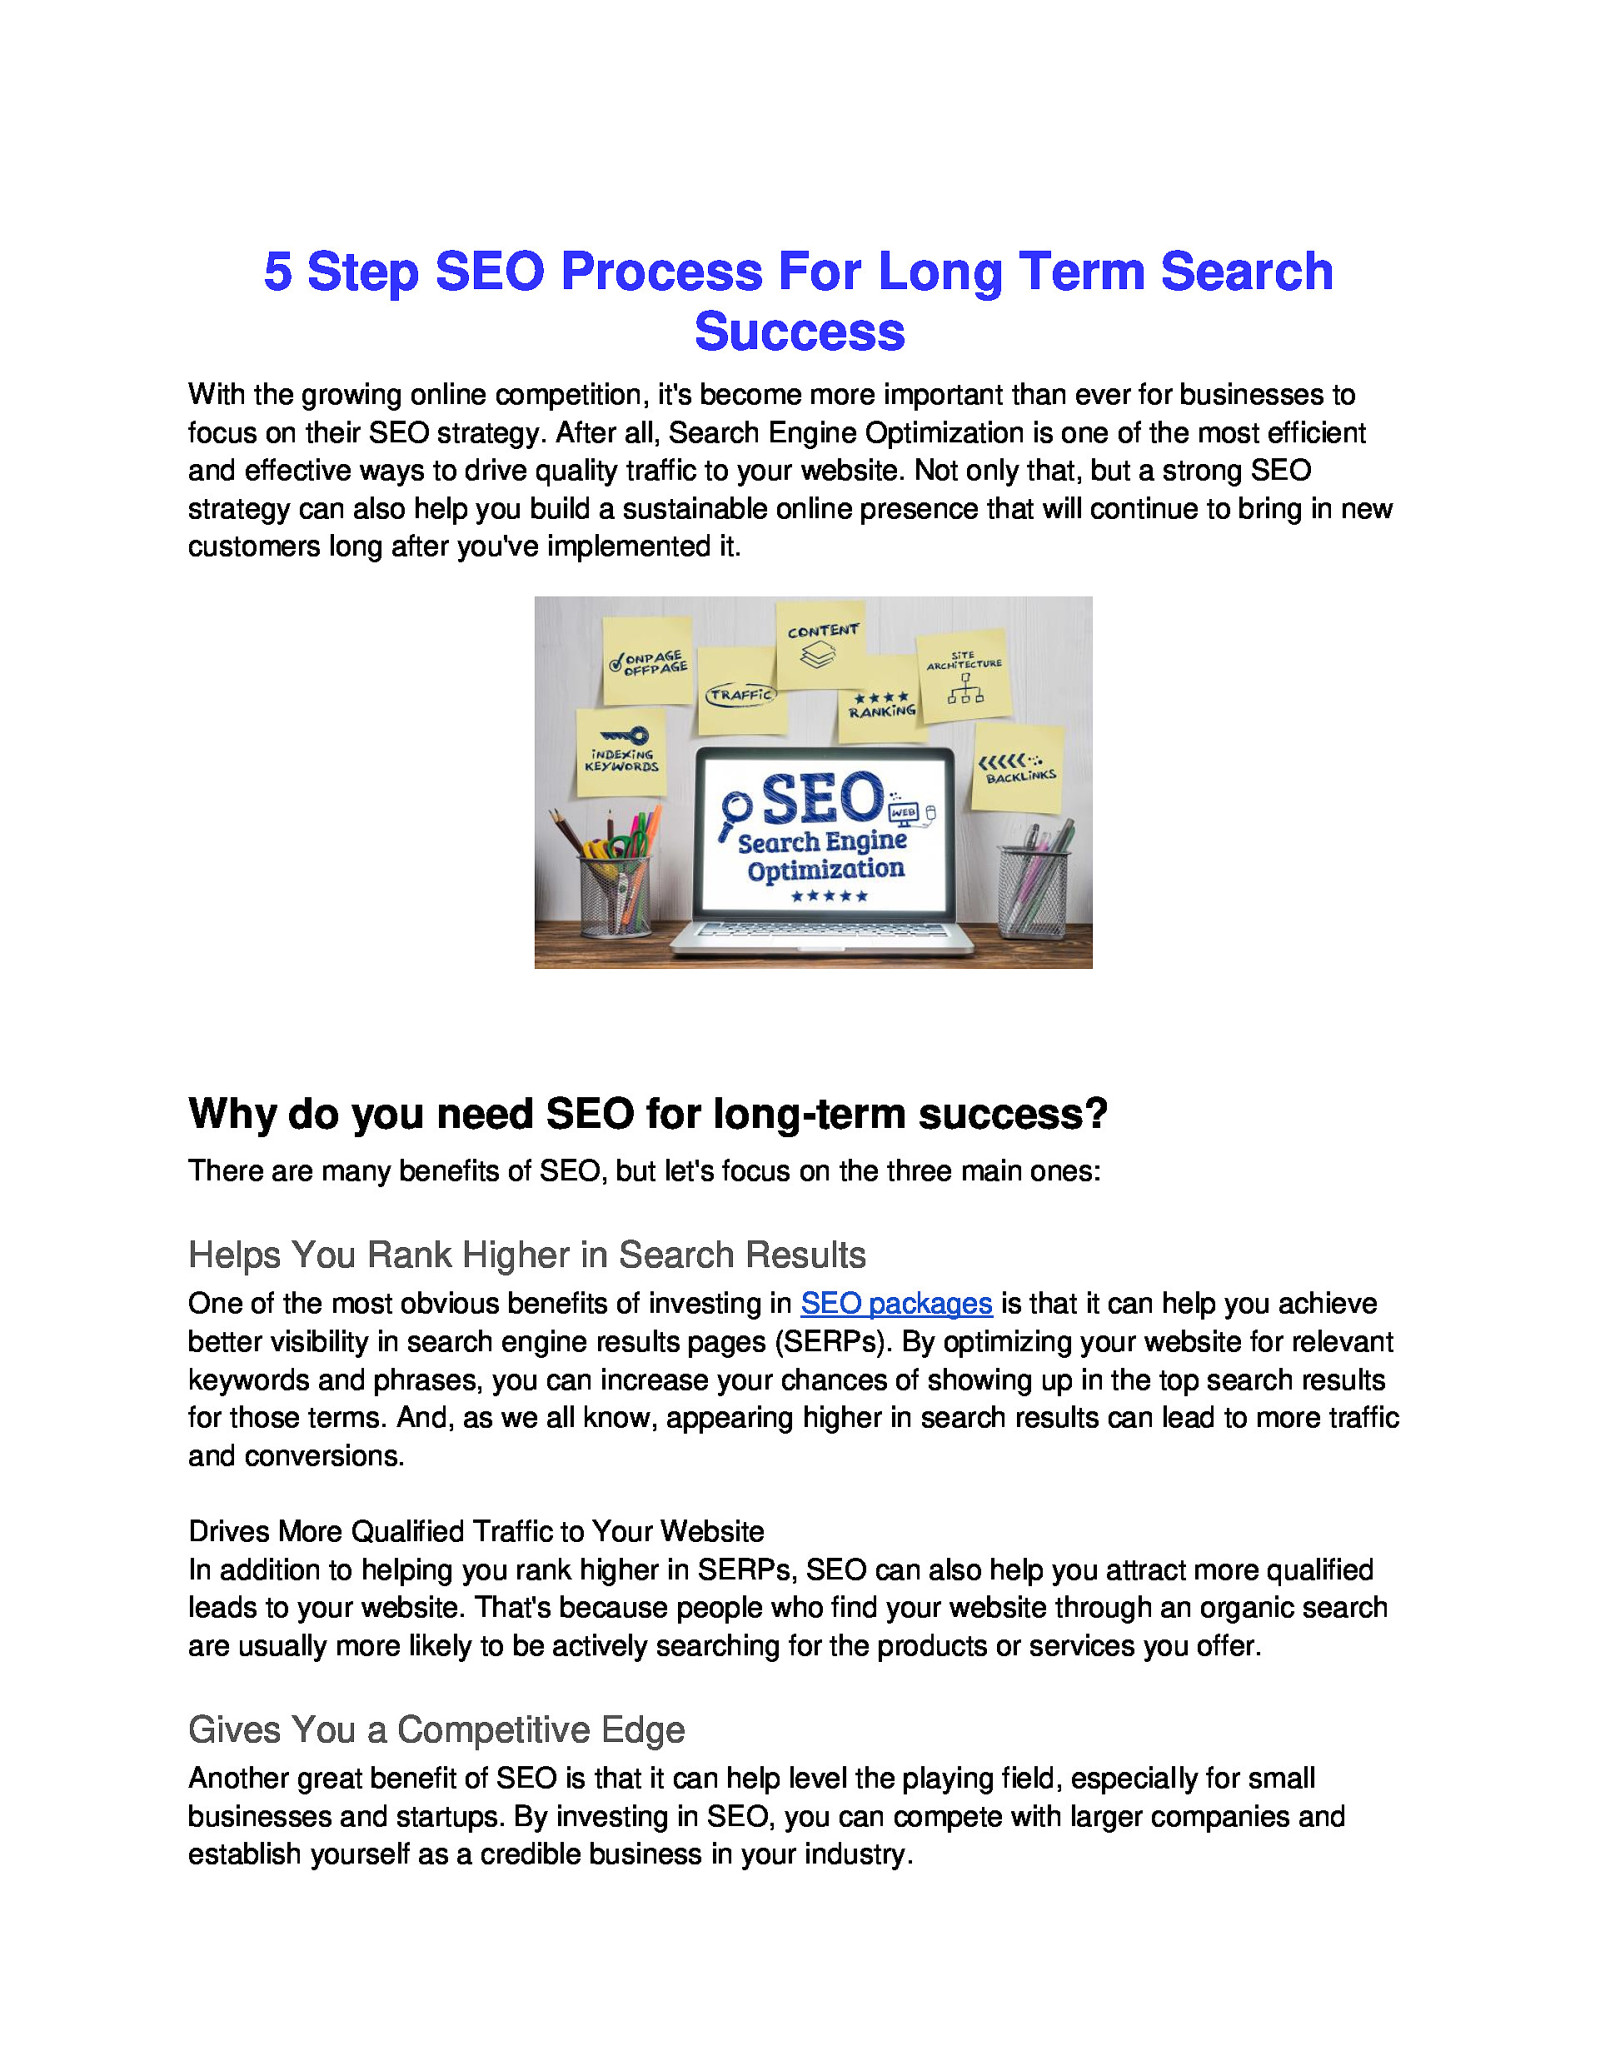 5 Step SEO Process For Long Term Search Success